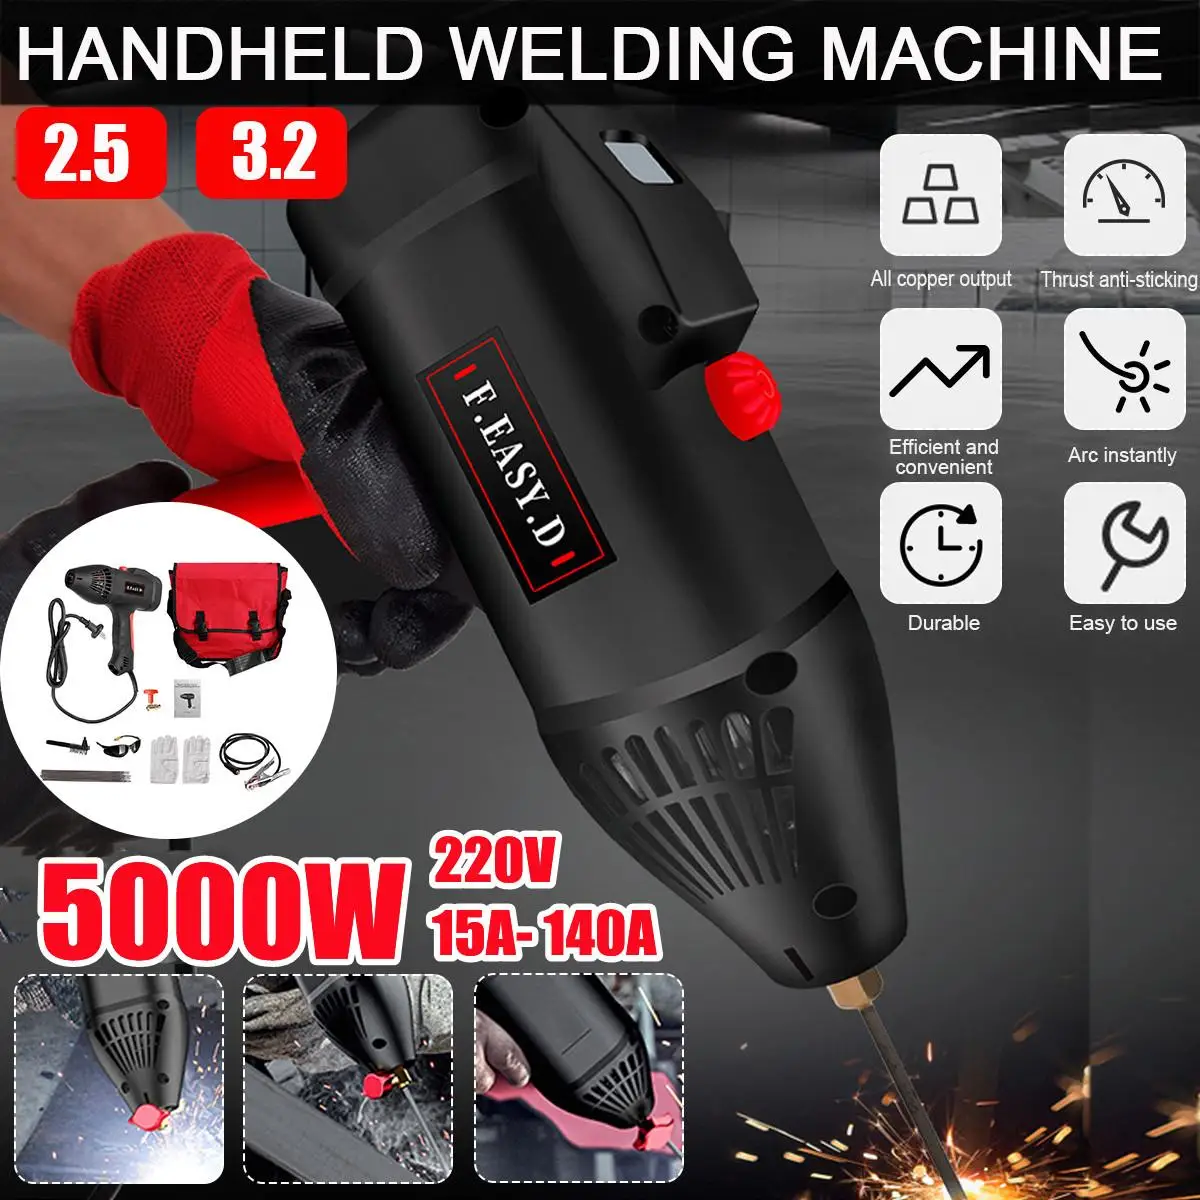 

220V 5000W Electric Digital Arc Welding Machine Handheld Automatic Welder Tool Current Thrust welding group for 2~14mm Thickness